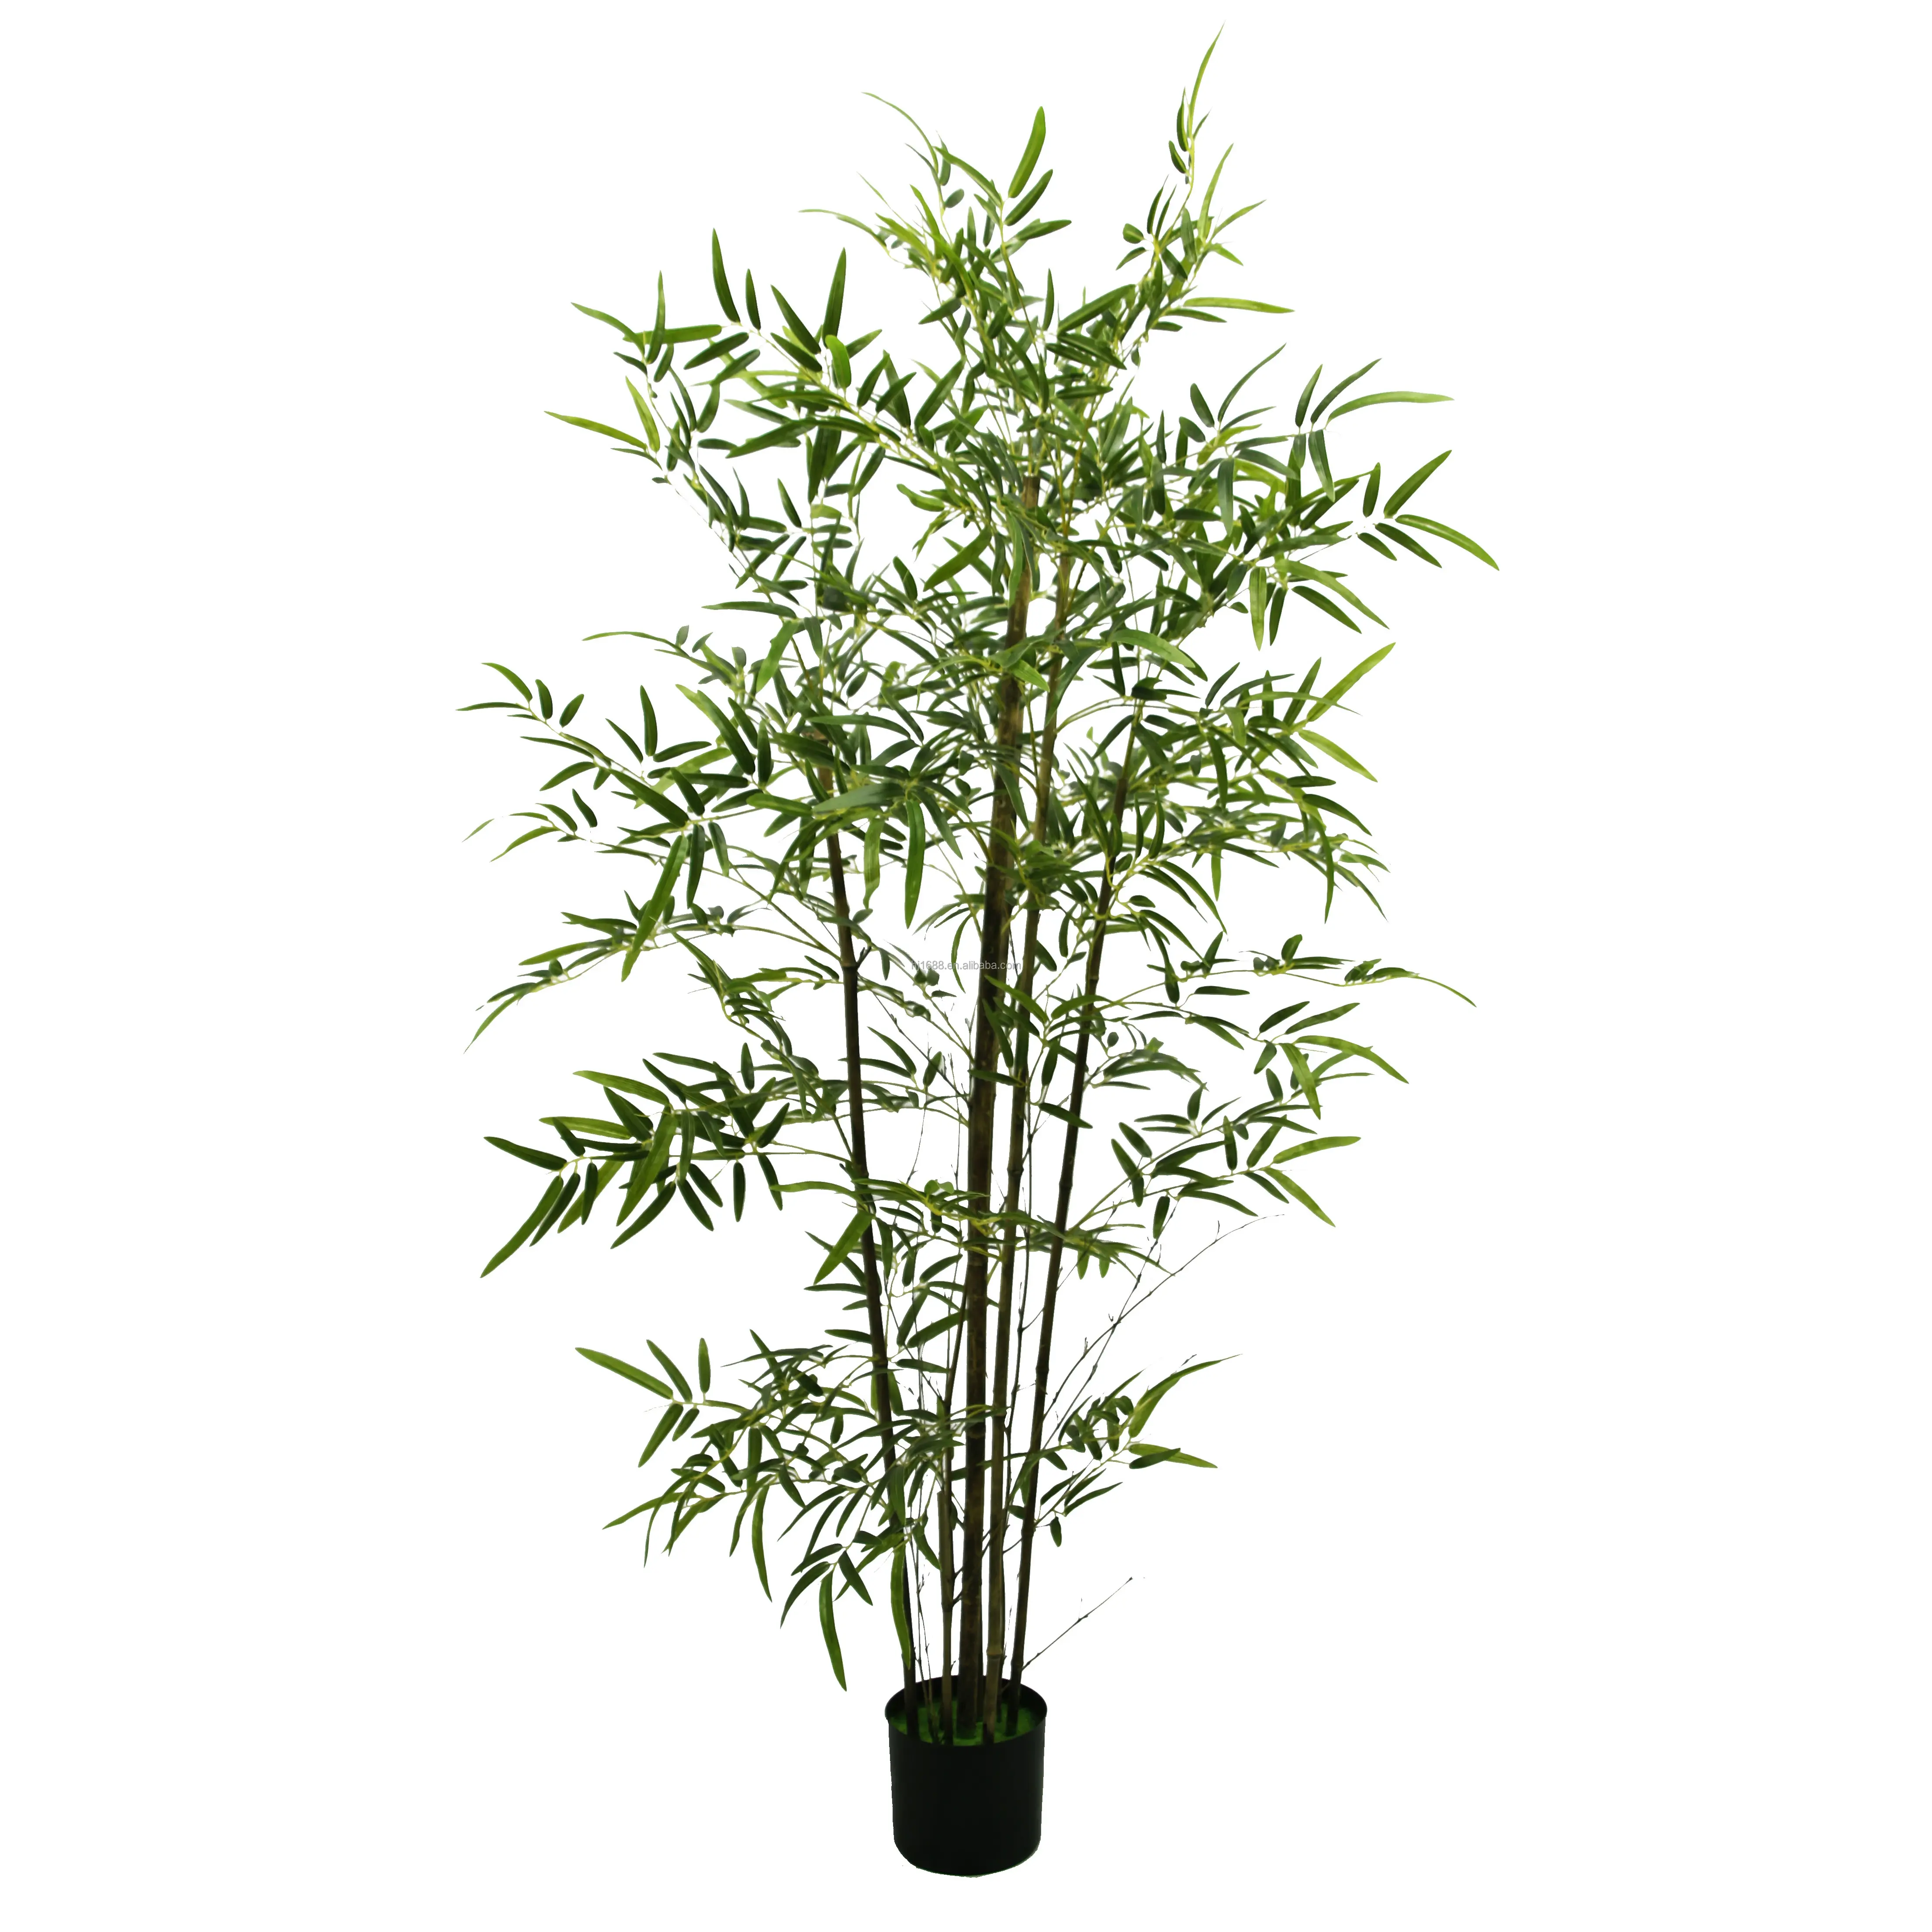 Hot Selling Lifelike 1.5m 5ft Tall Fake Plants Faux Silk Leaves Artificial Bamboo Tree In Planter For Home & Garden Decor